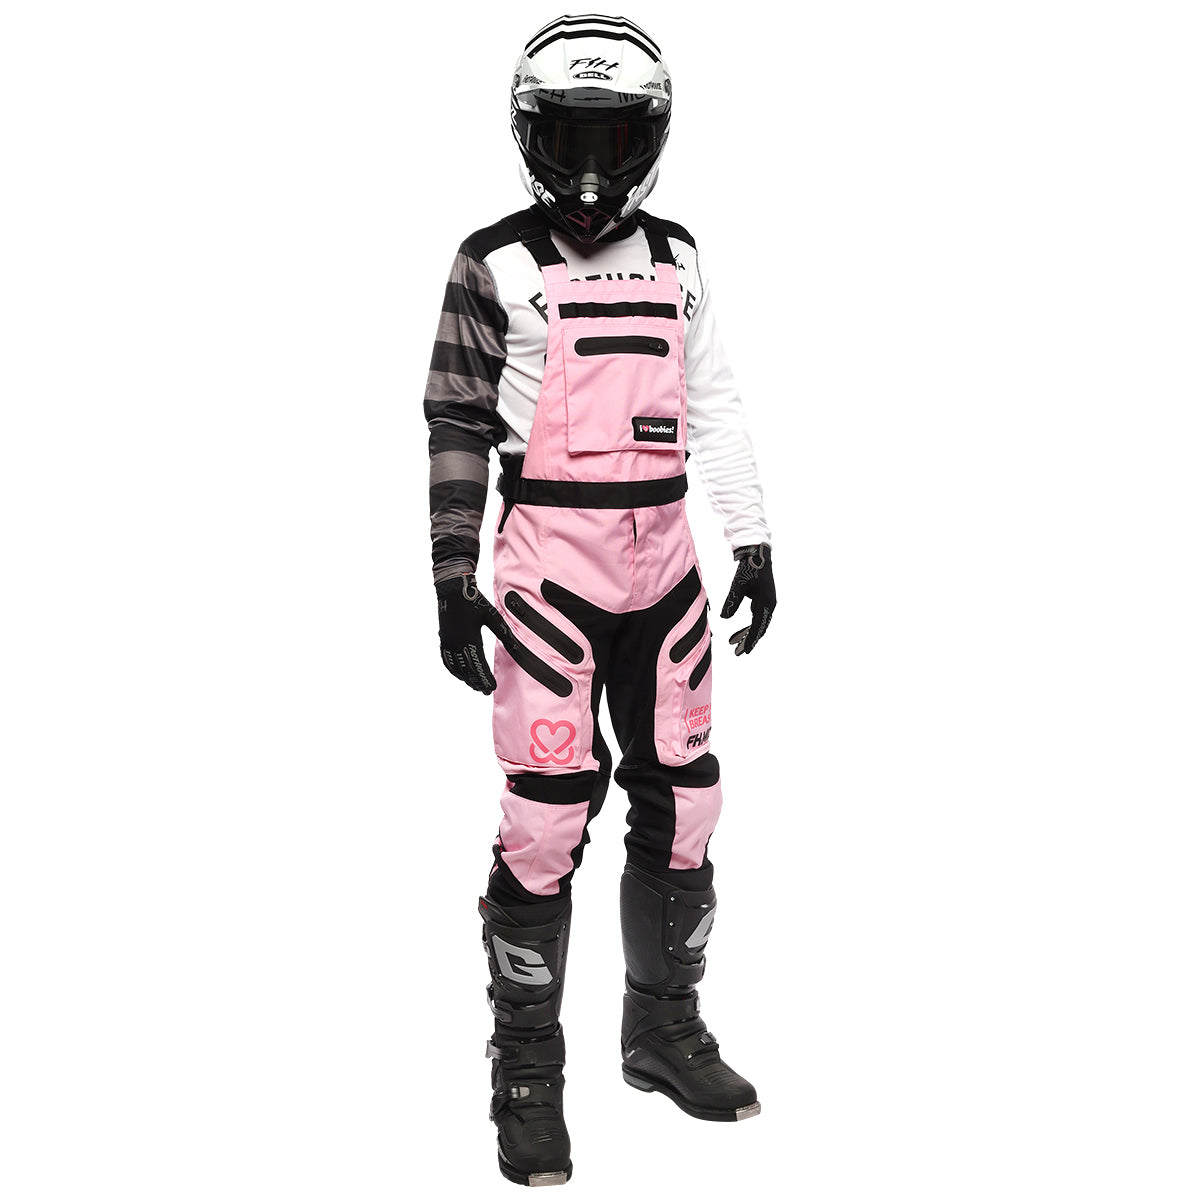 Keep A Breast Womens Motorall – Fasthouse